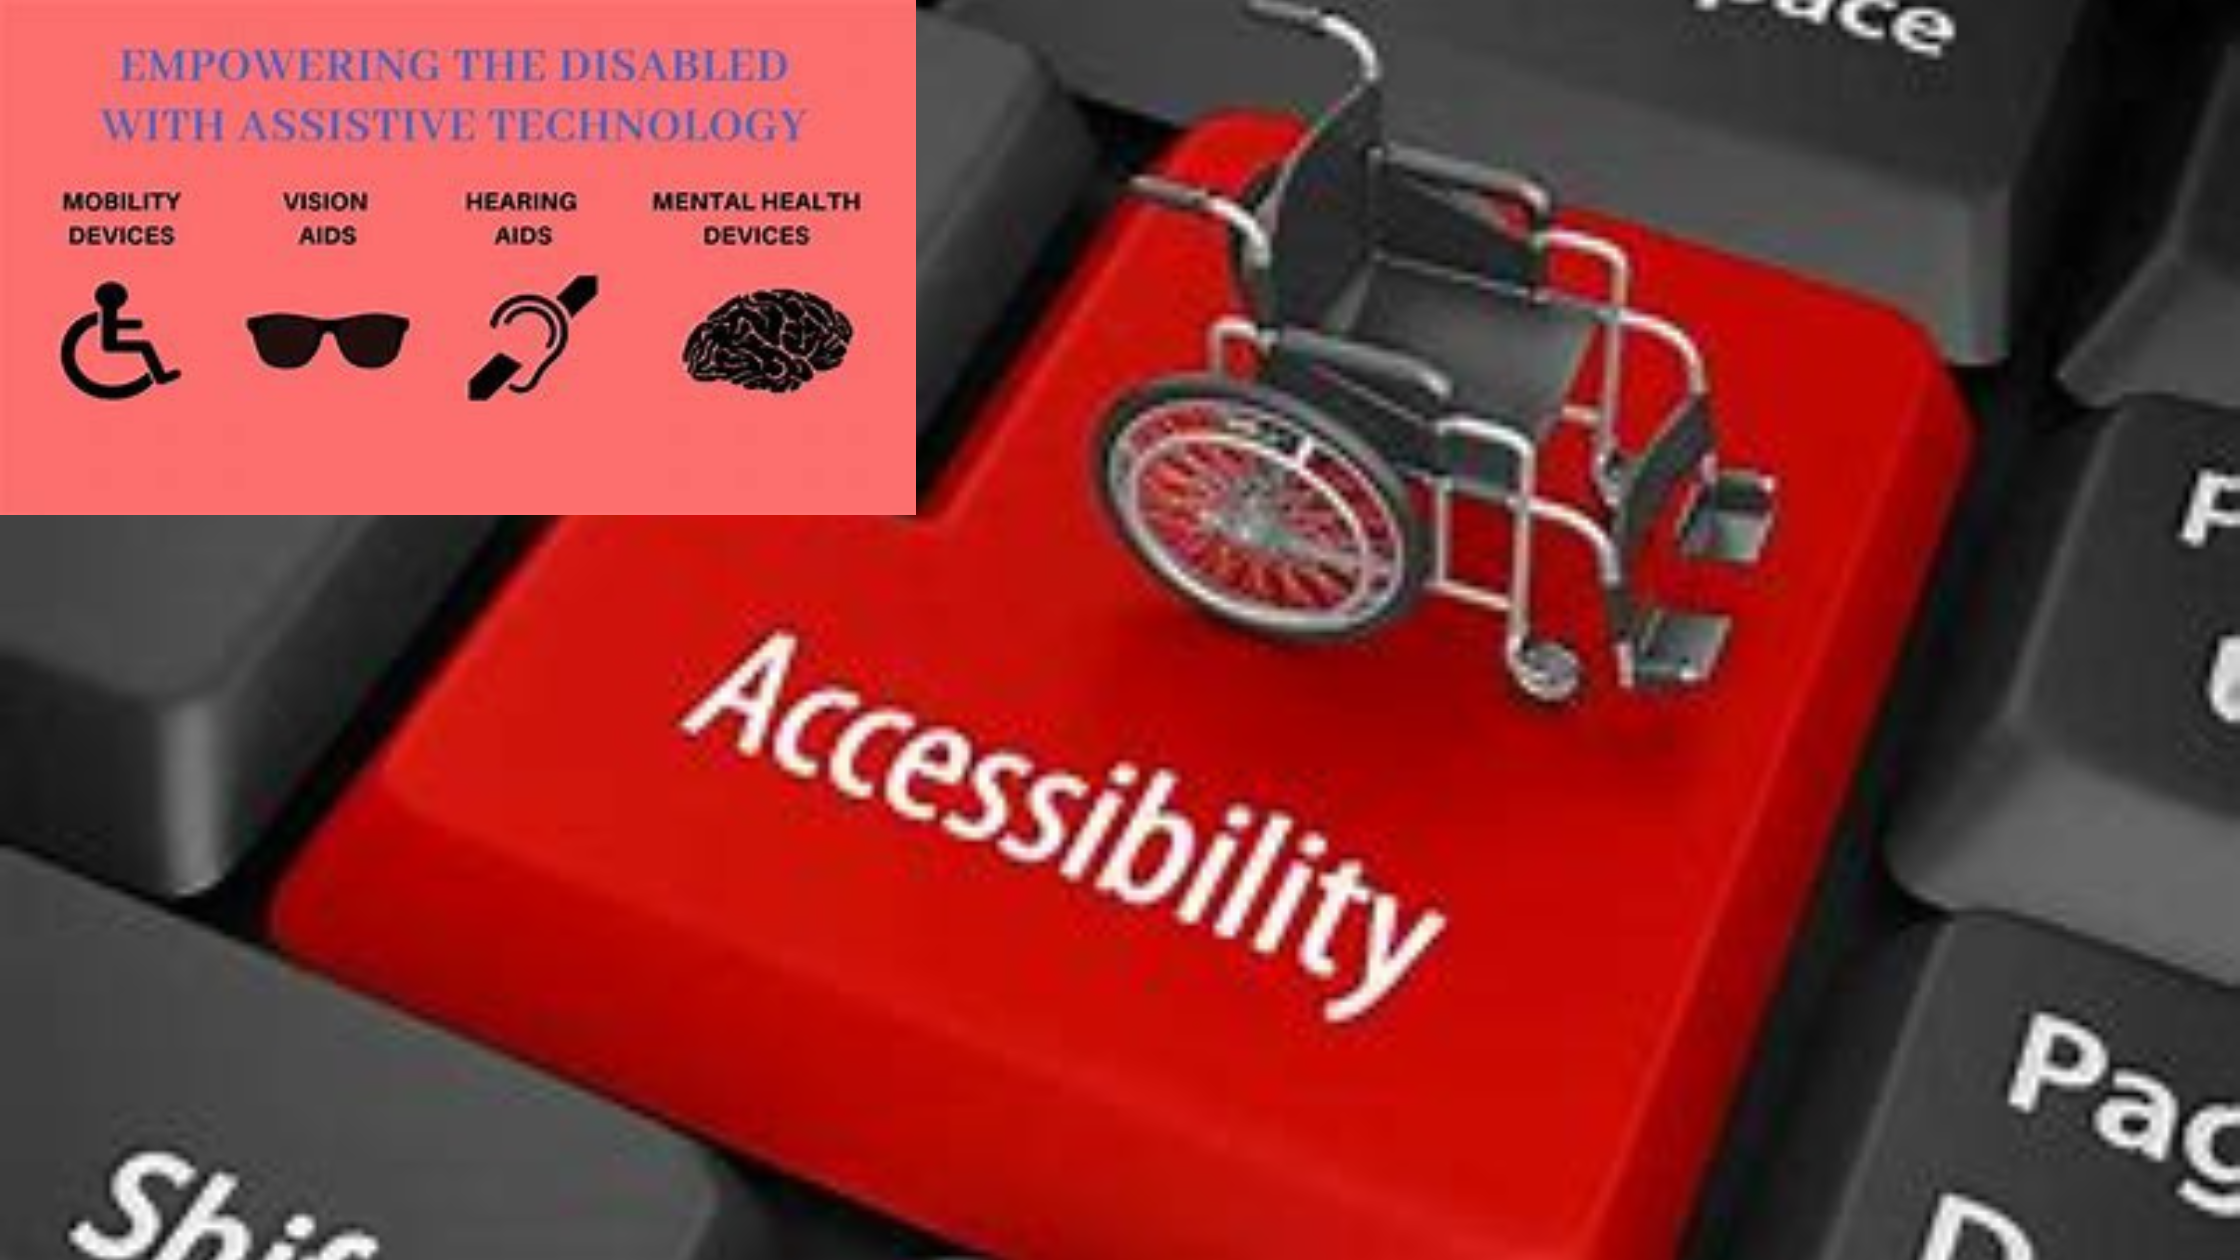 Accessibility Technology: Empowering People with Disabilities